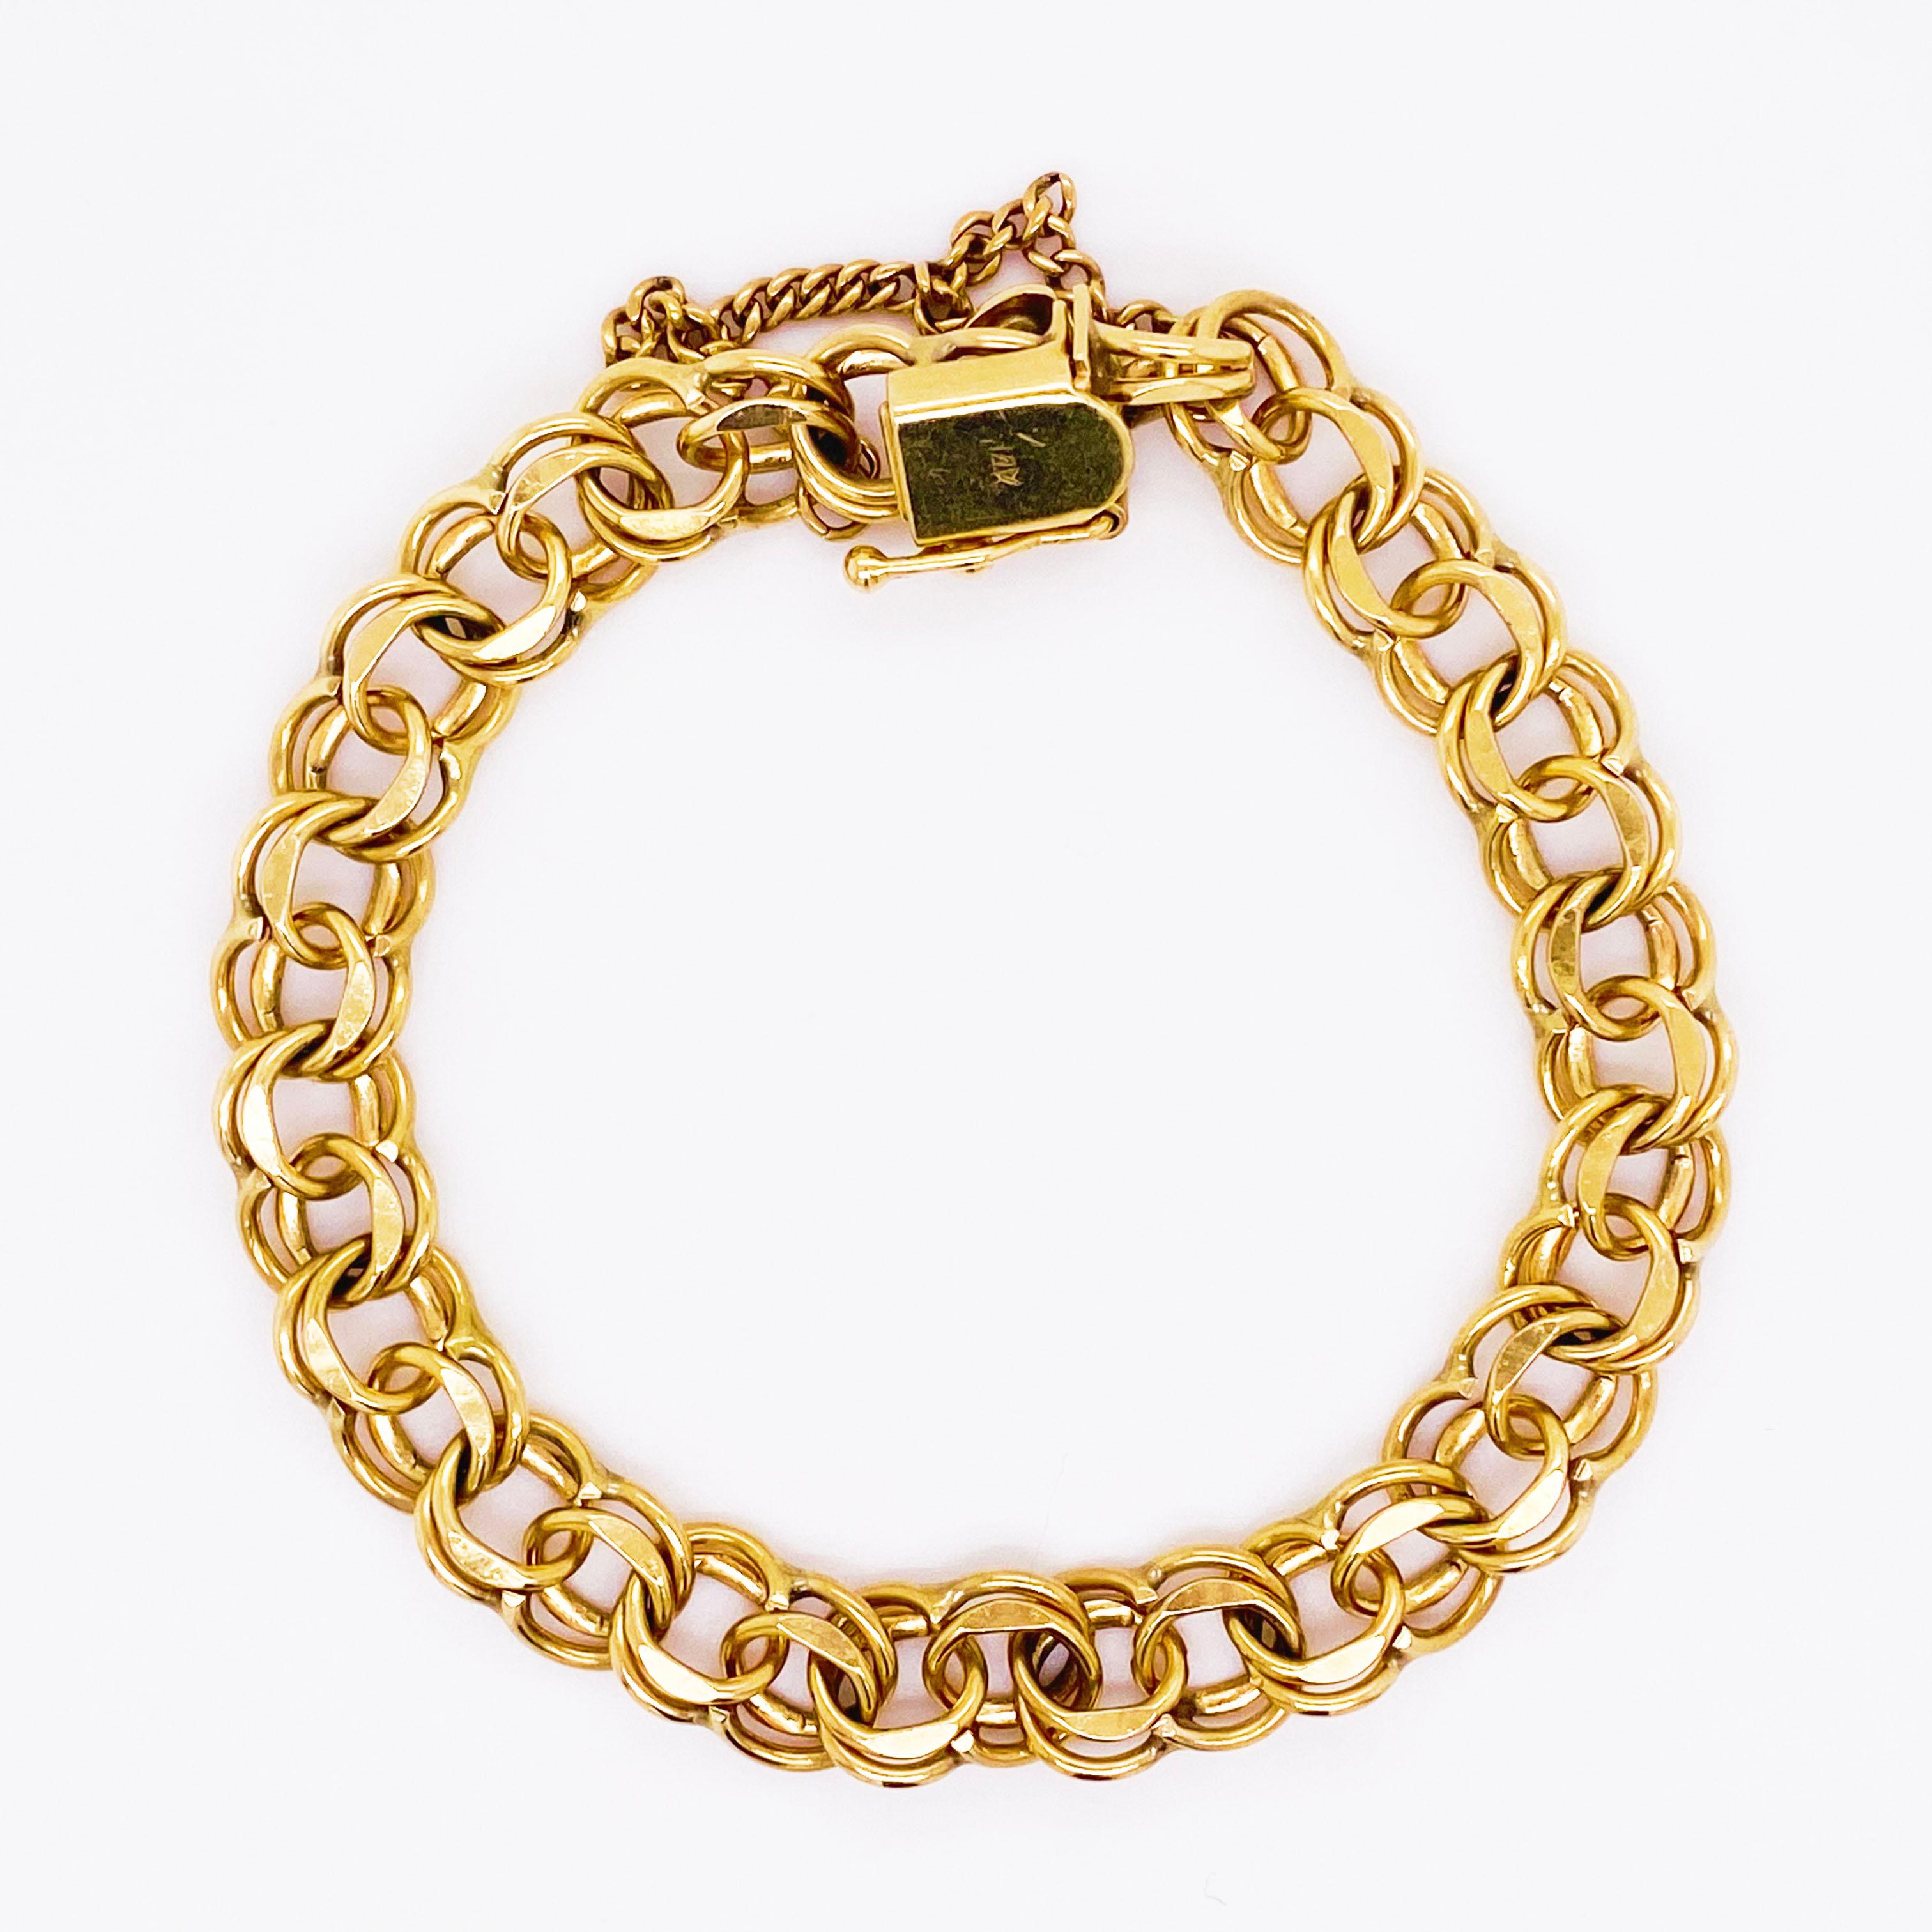 This is a handmade double link estate charm bracelet and it was made the old fashion way-heavy links and sturdy! Each link was handmade and put together to make this gorgeous, double link design. The bracelet is solid 14 karat yellow gold with a